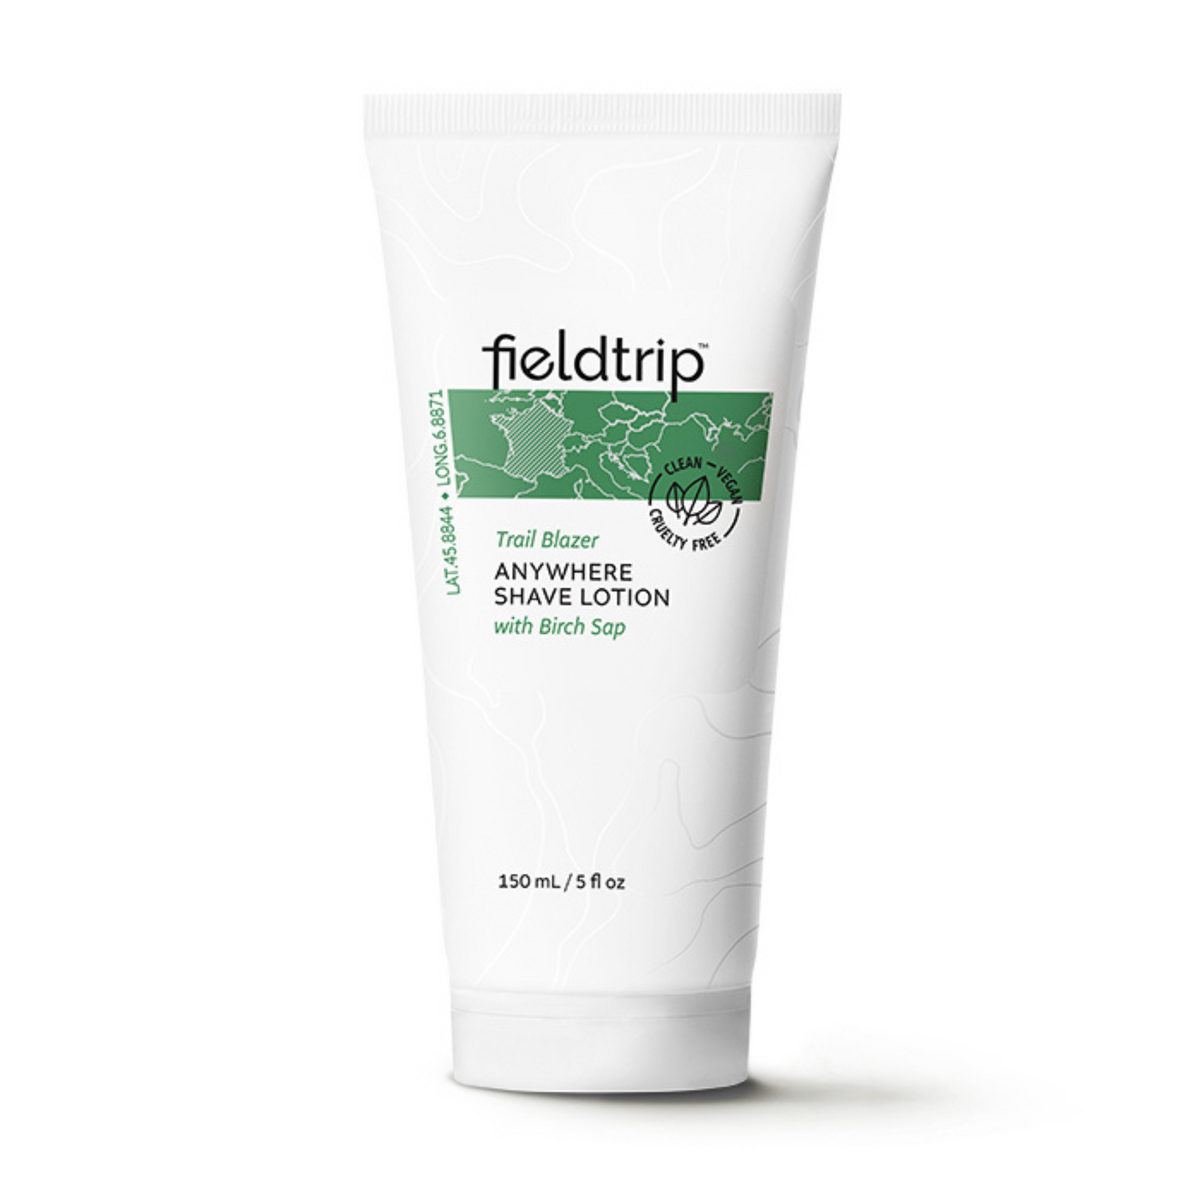 Primary Image of Fieldtrip Trail Blazer Anywhere Shave Lotion